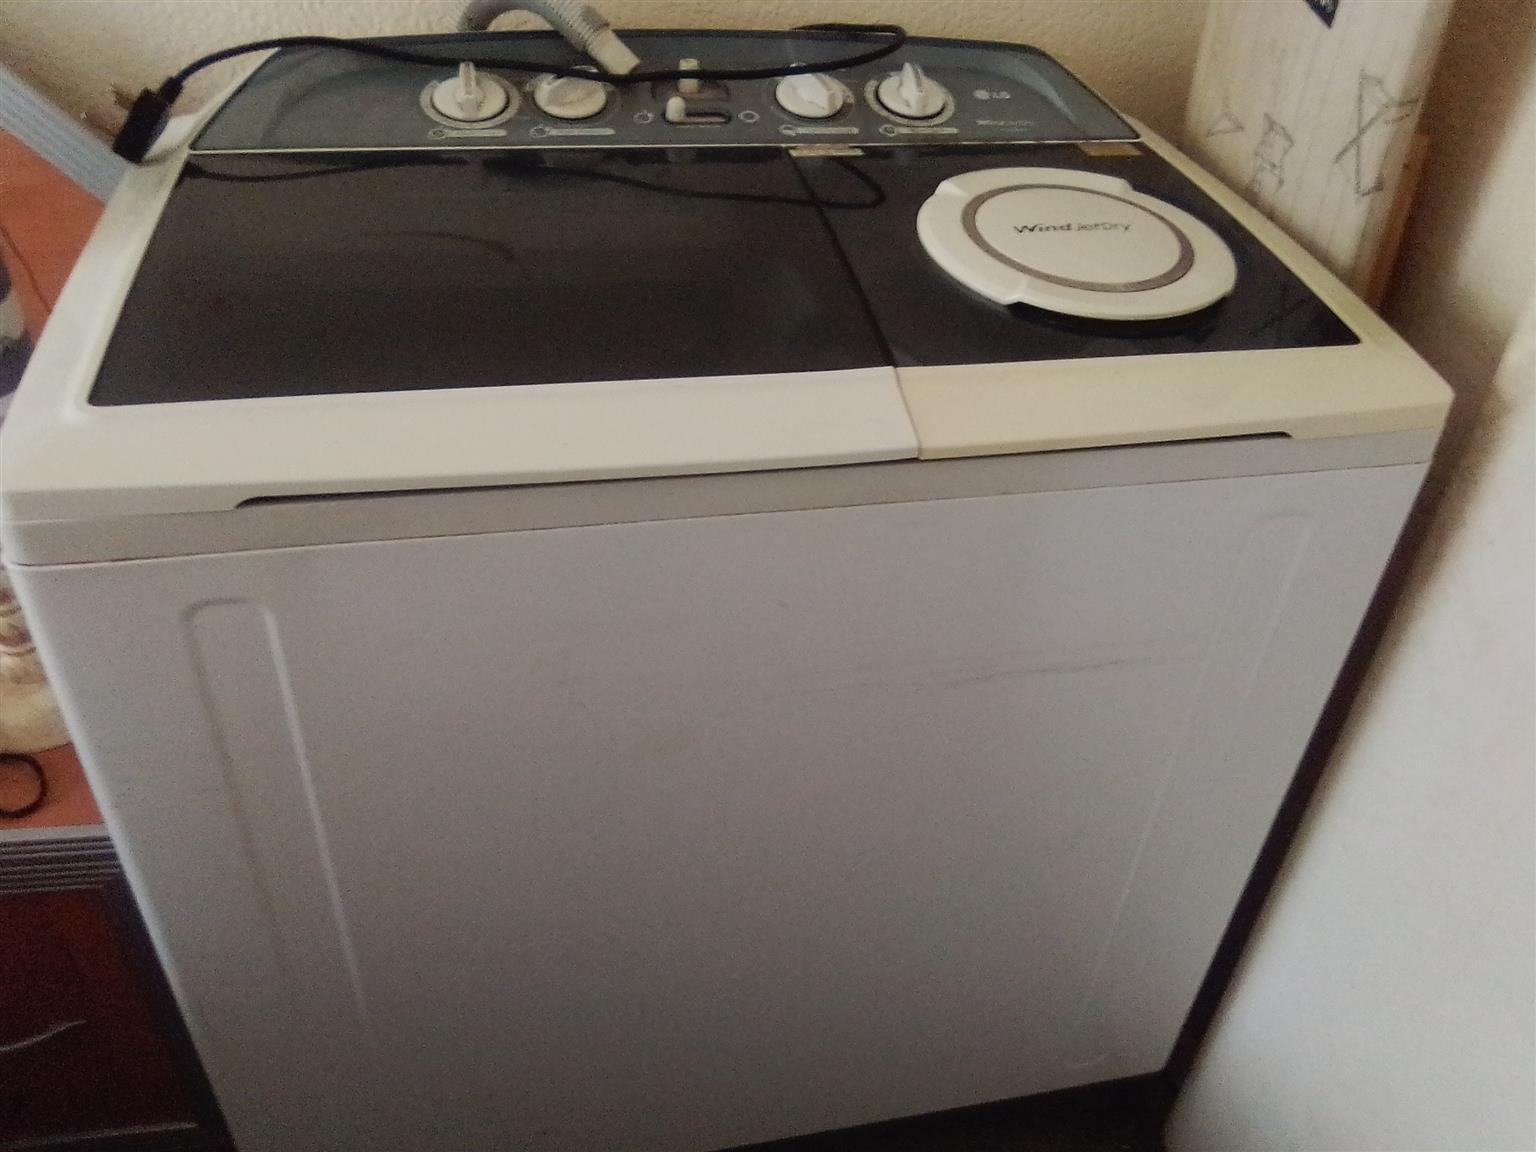 LG Twin Tub 13 kg in perfect working order, still in perfect condition